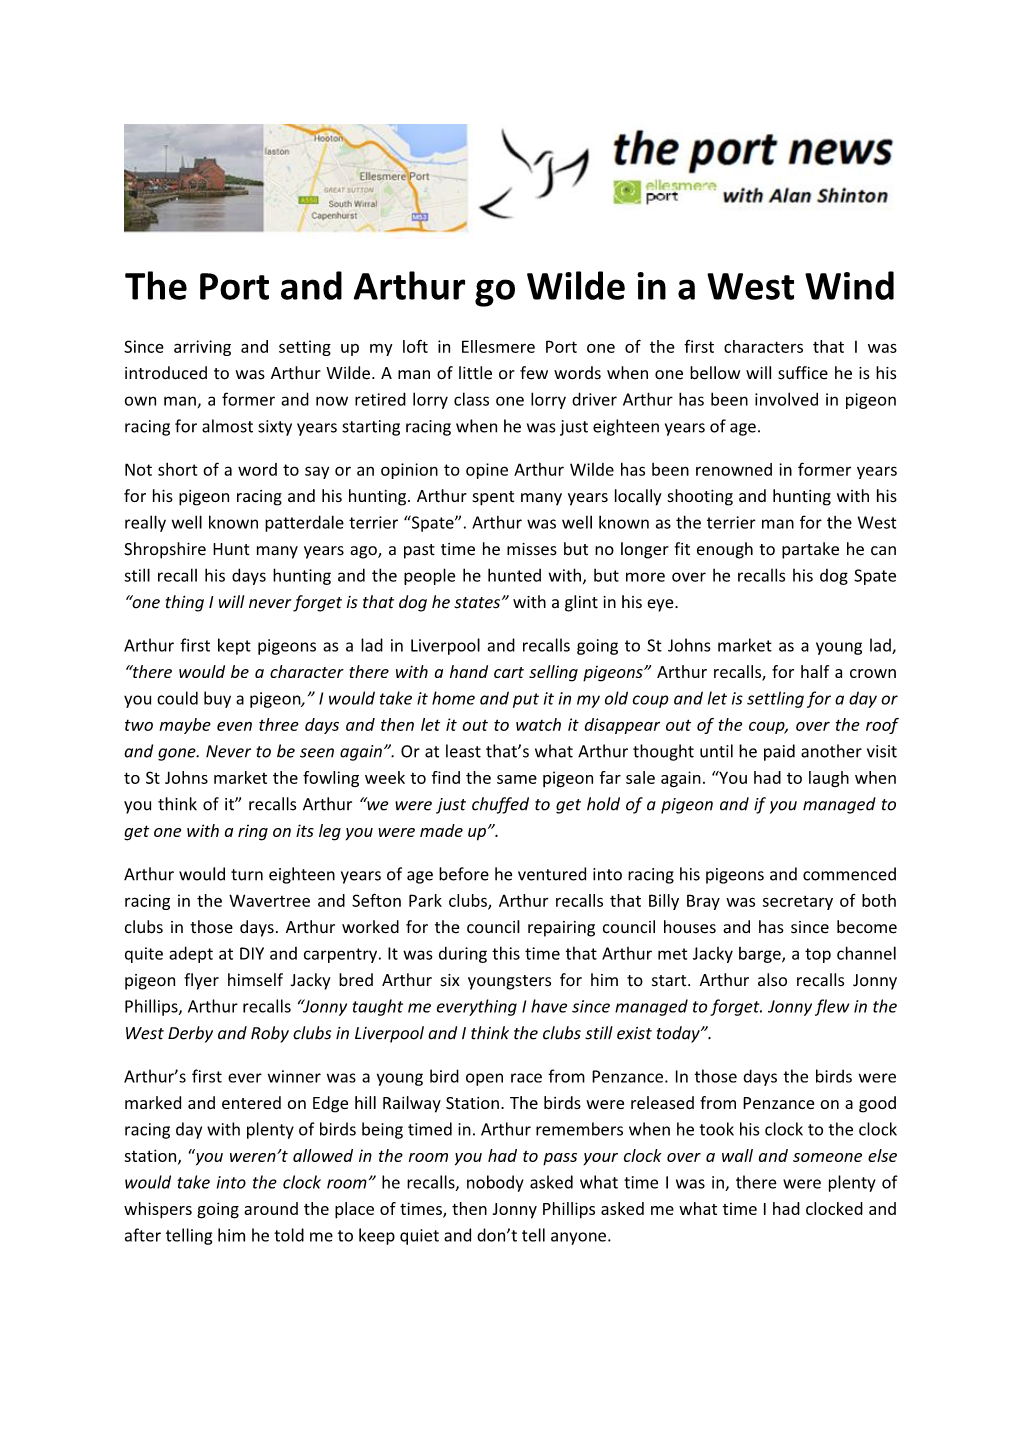 The Port and Arthur Go Wilde in a West Wind